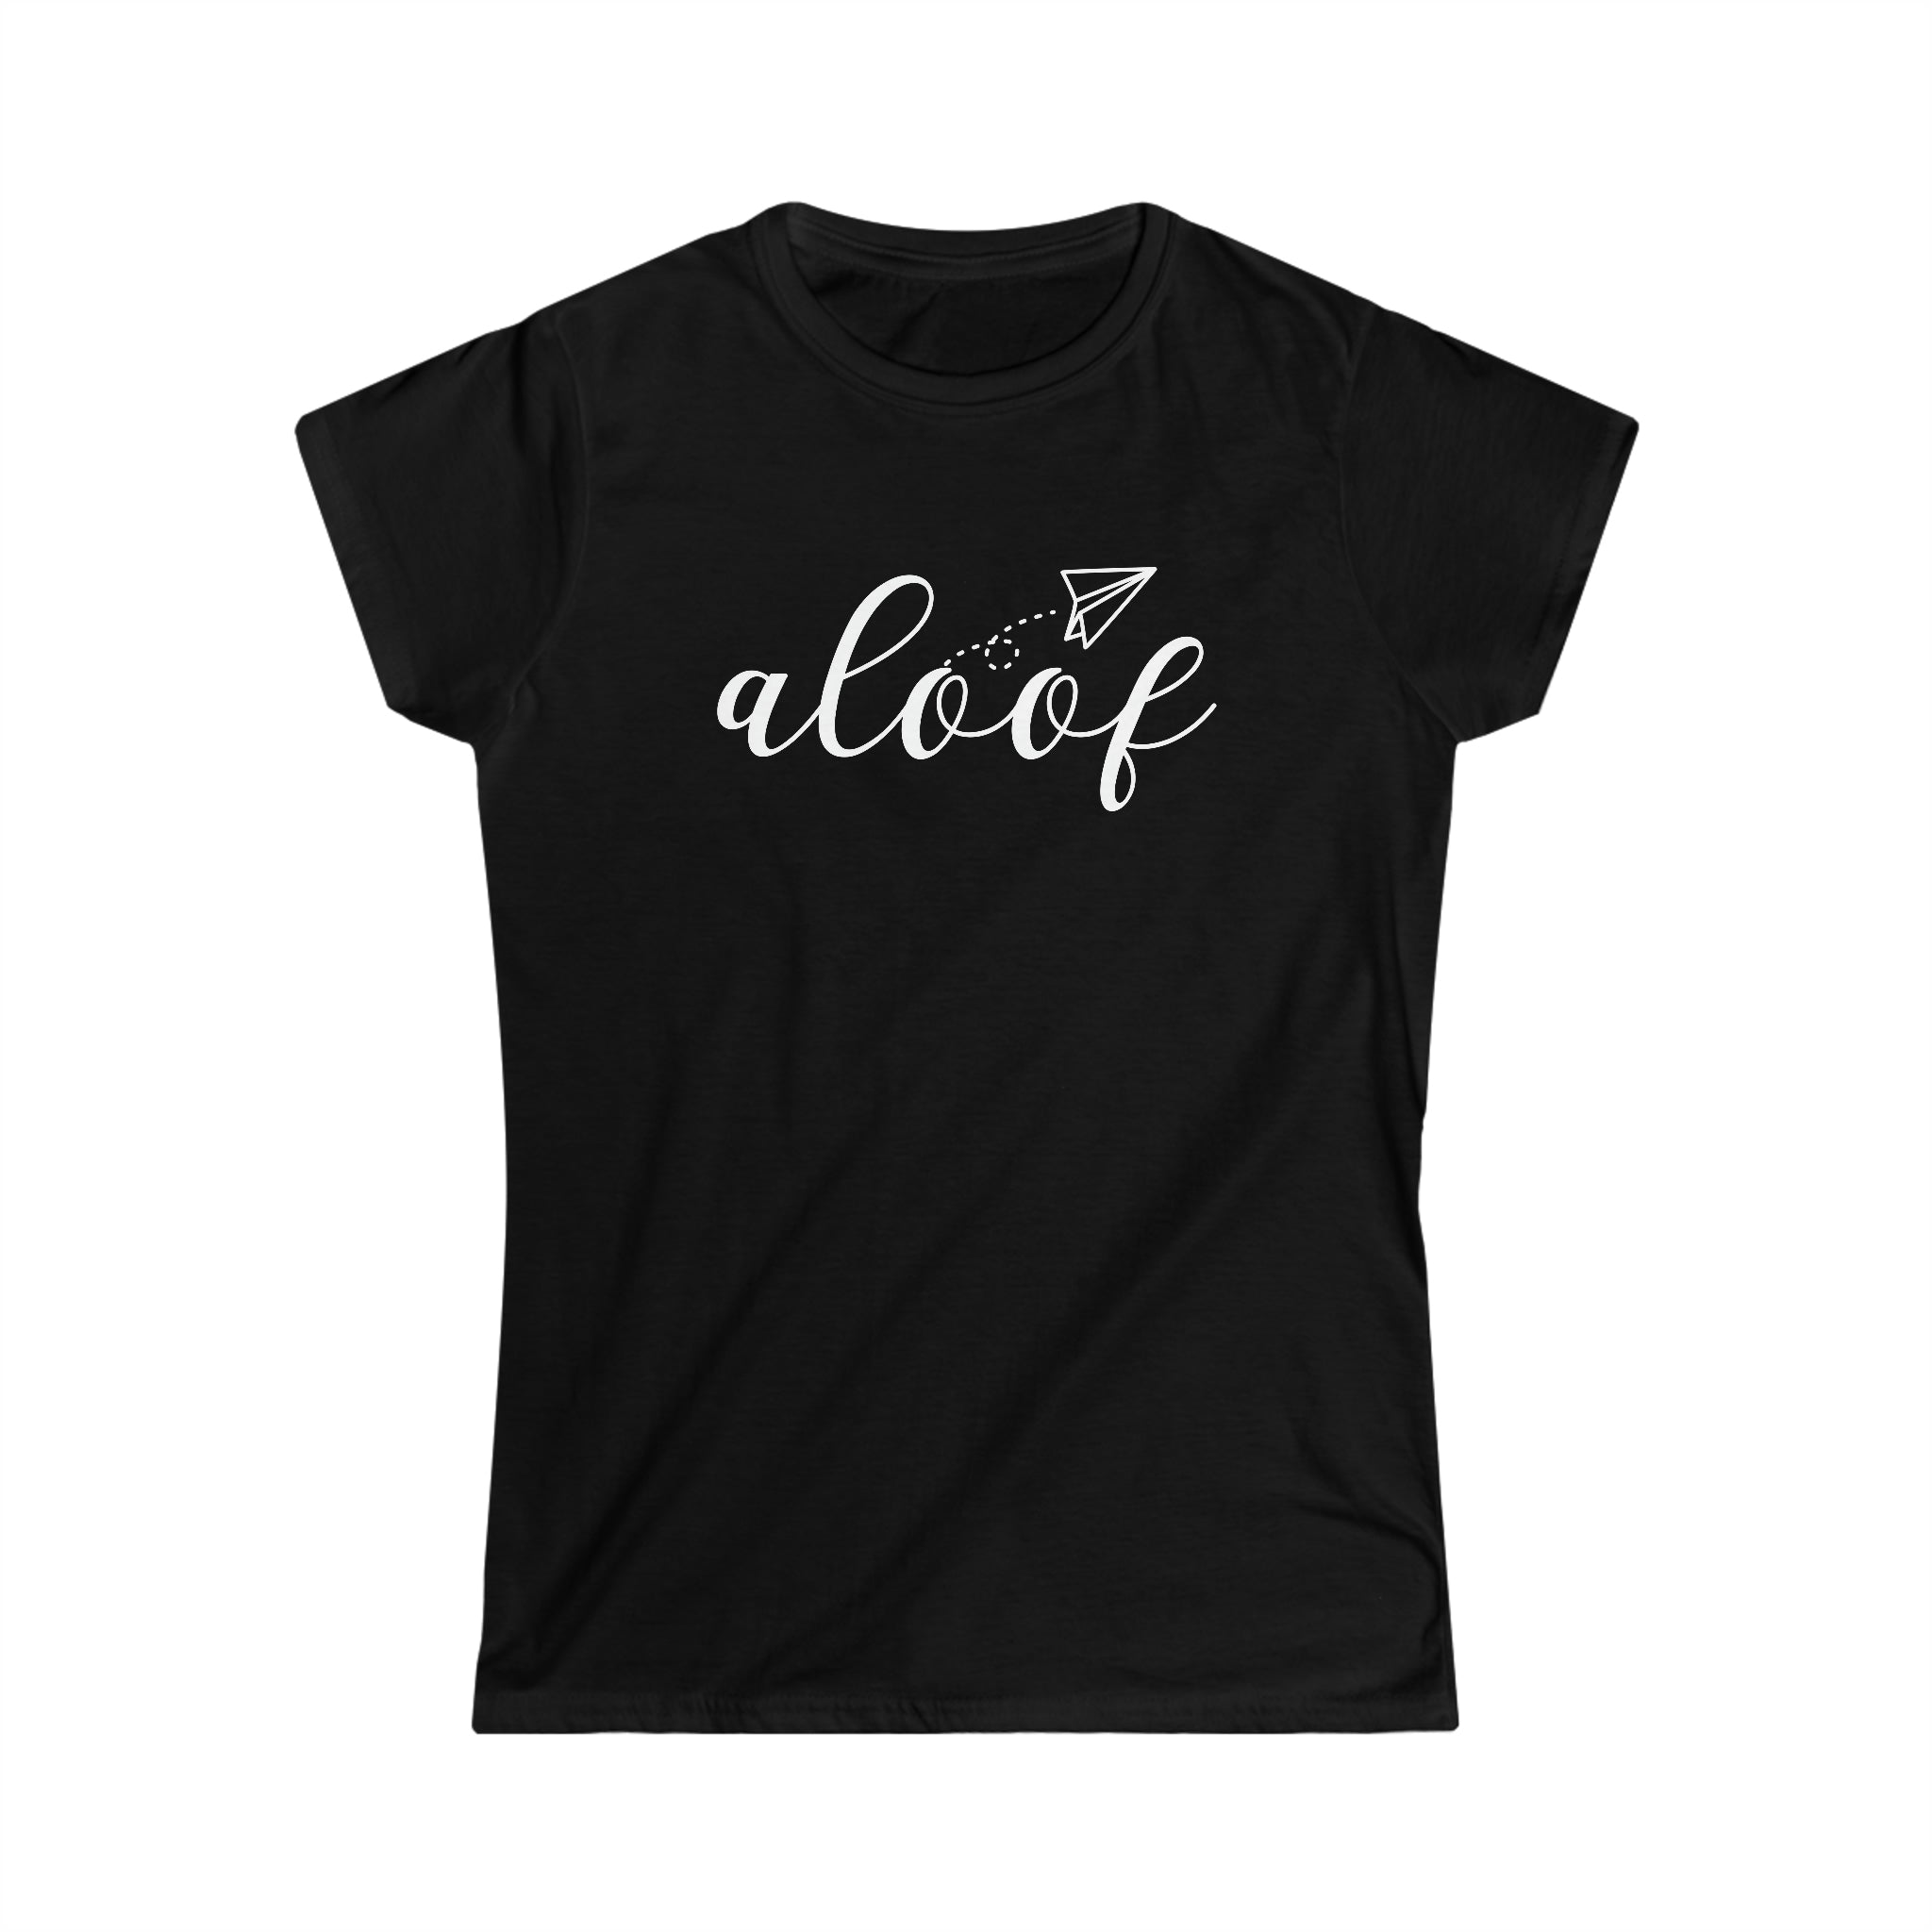  ALOOF Empowerment Women's Softstyle Tee, Sarcastic Ladies Shirt, Sarcastic T-Shirt, Funny Fitted Tshirt T-ShirtBlack2XL